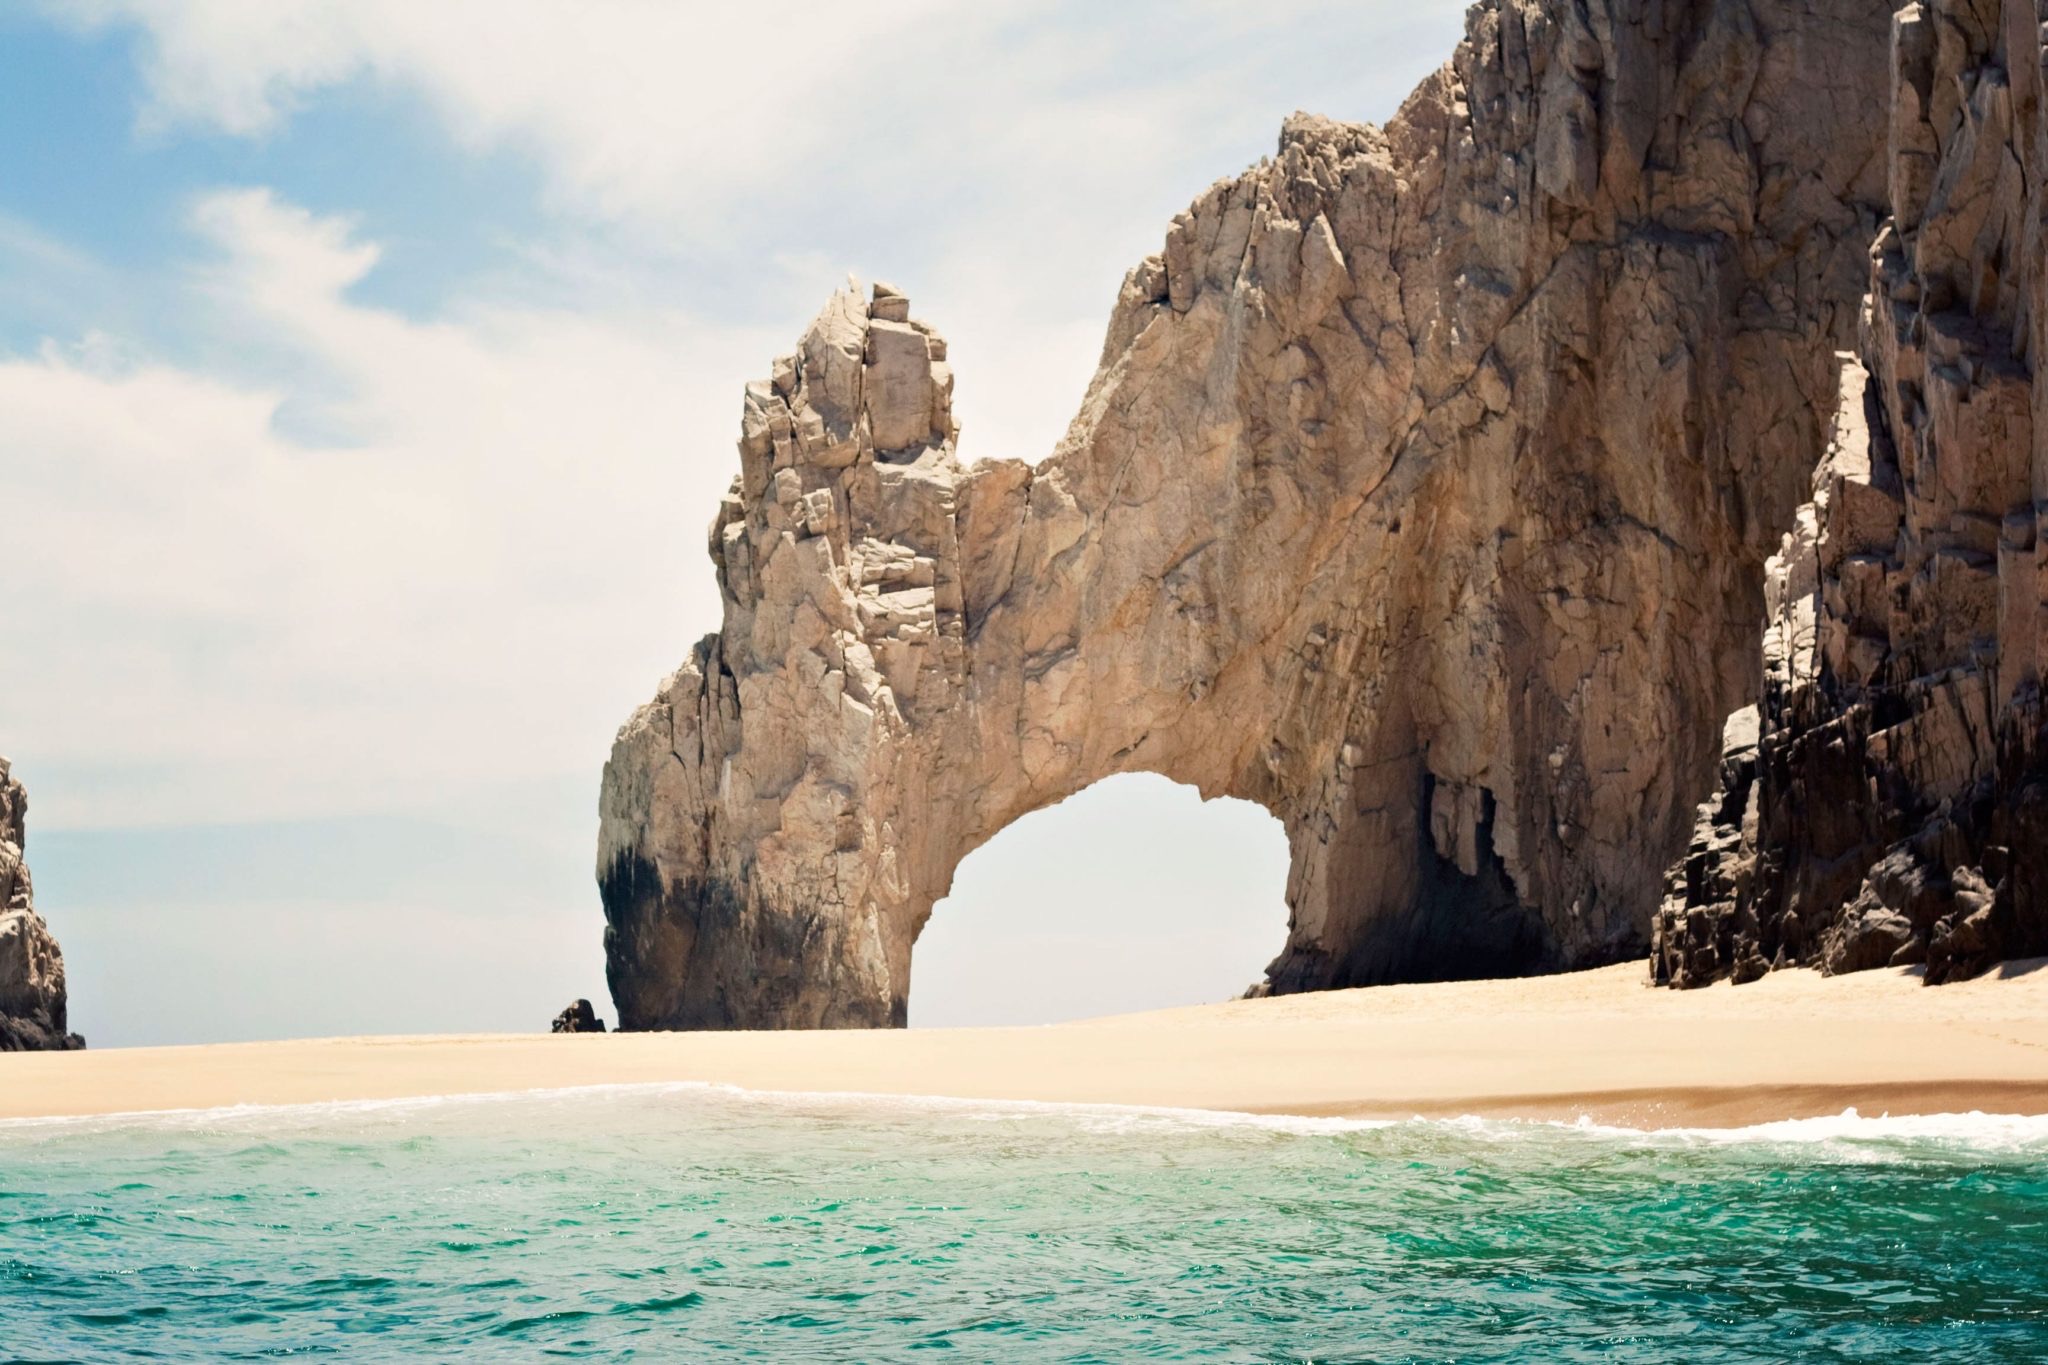 The Arch of Cabo San Lucas